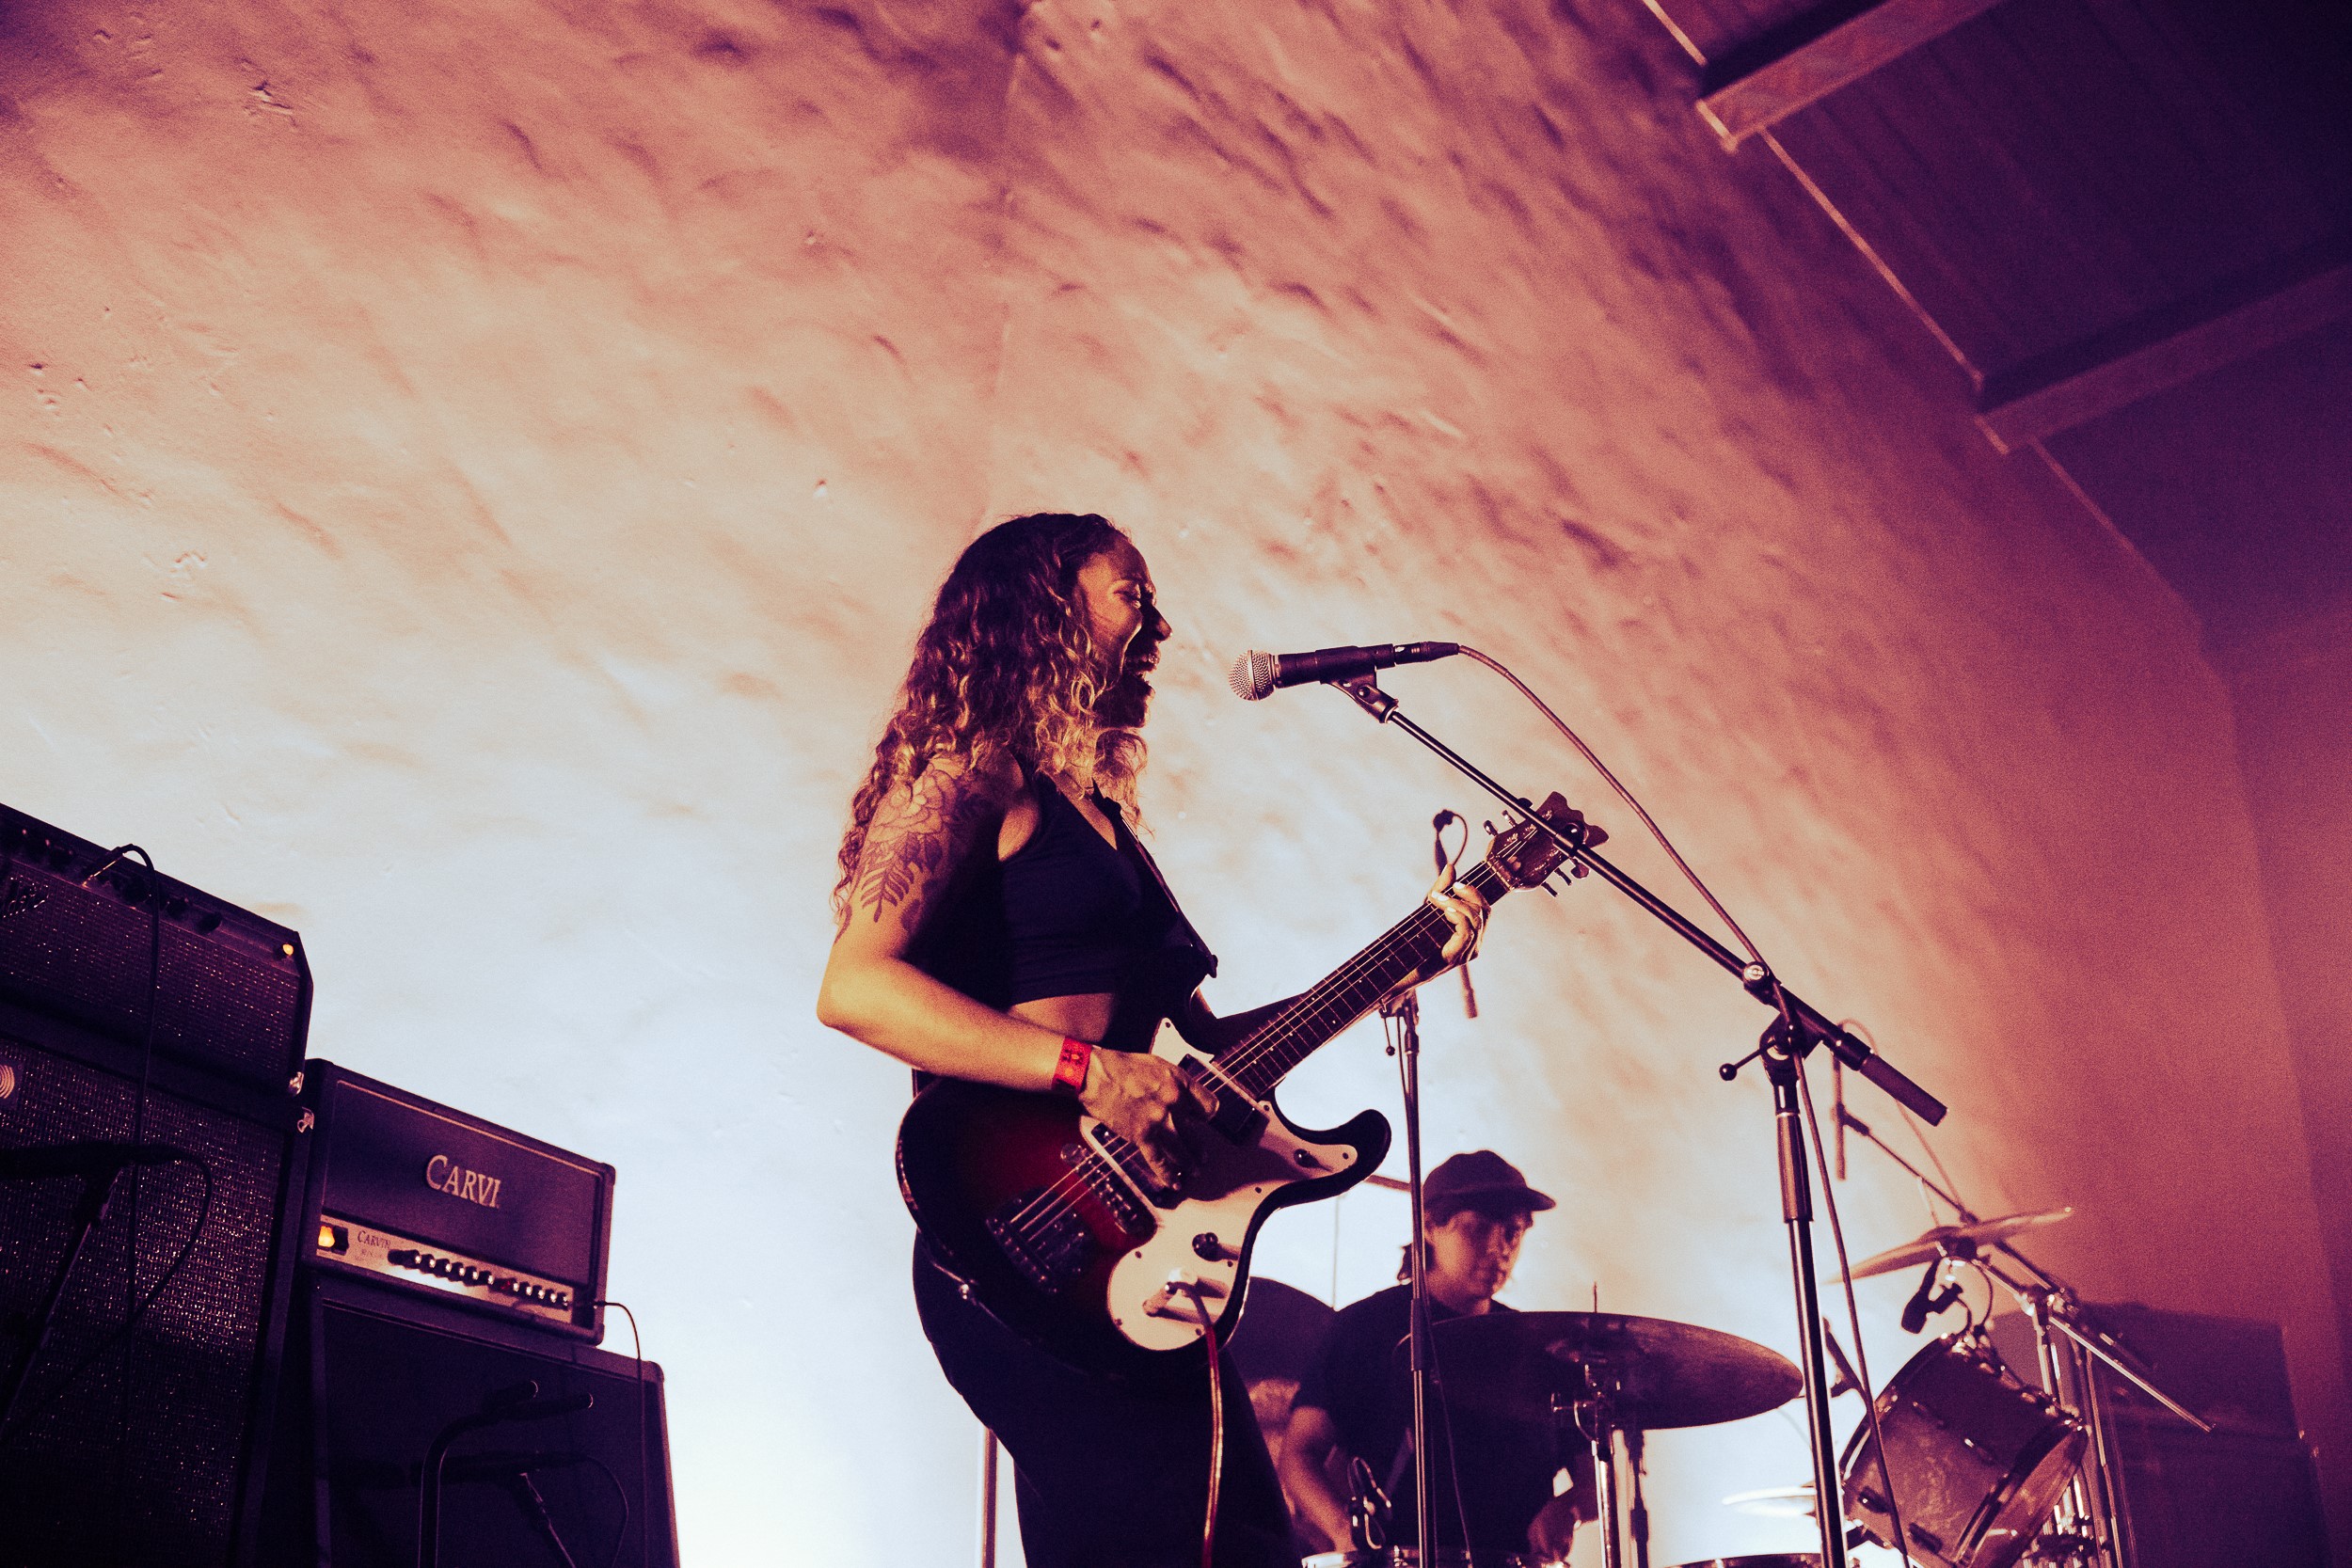 Maria strums her guitar and Coley plays drums at Ragana's live performance at Hollywood Forever in Los Angeles.